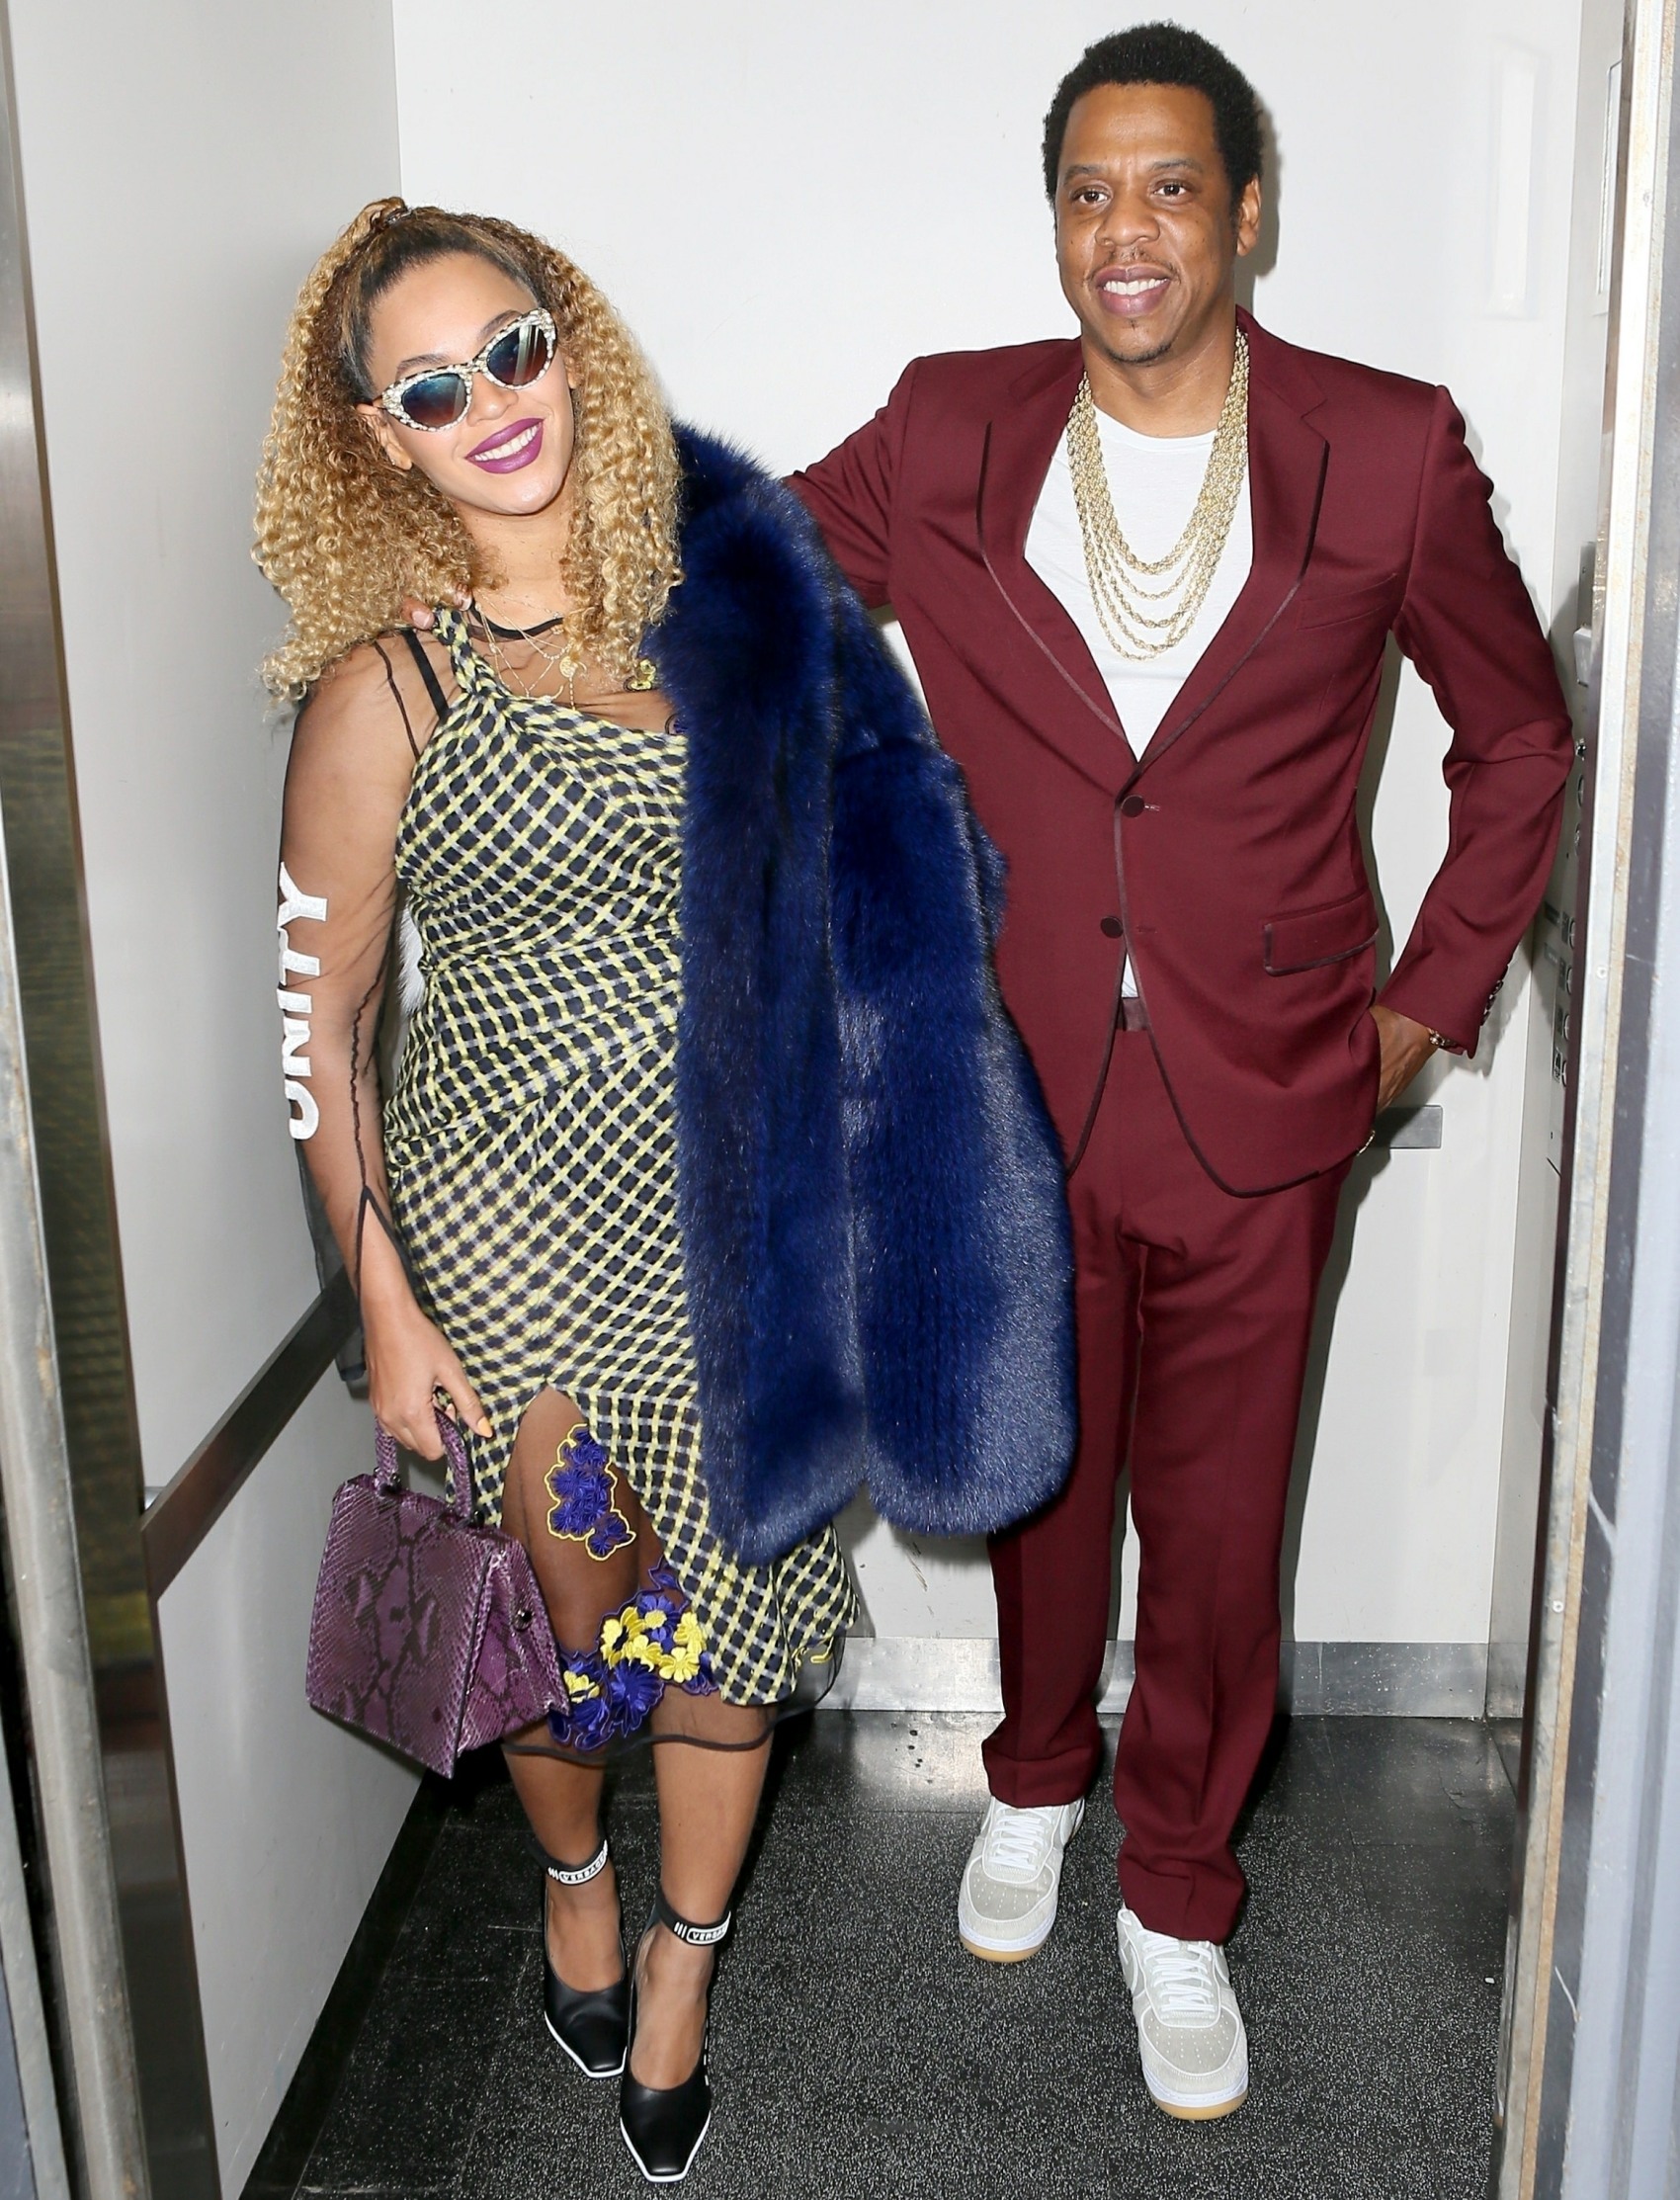 Jay-Z and Beyonce leaving the movies on his birthday